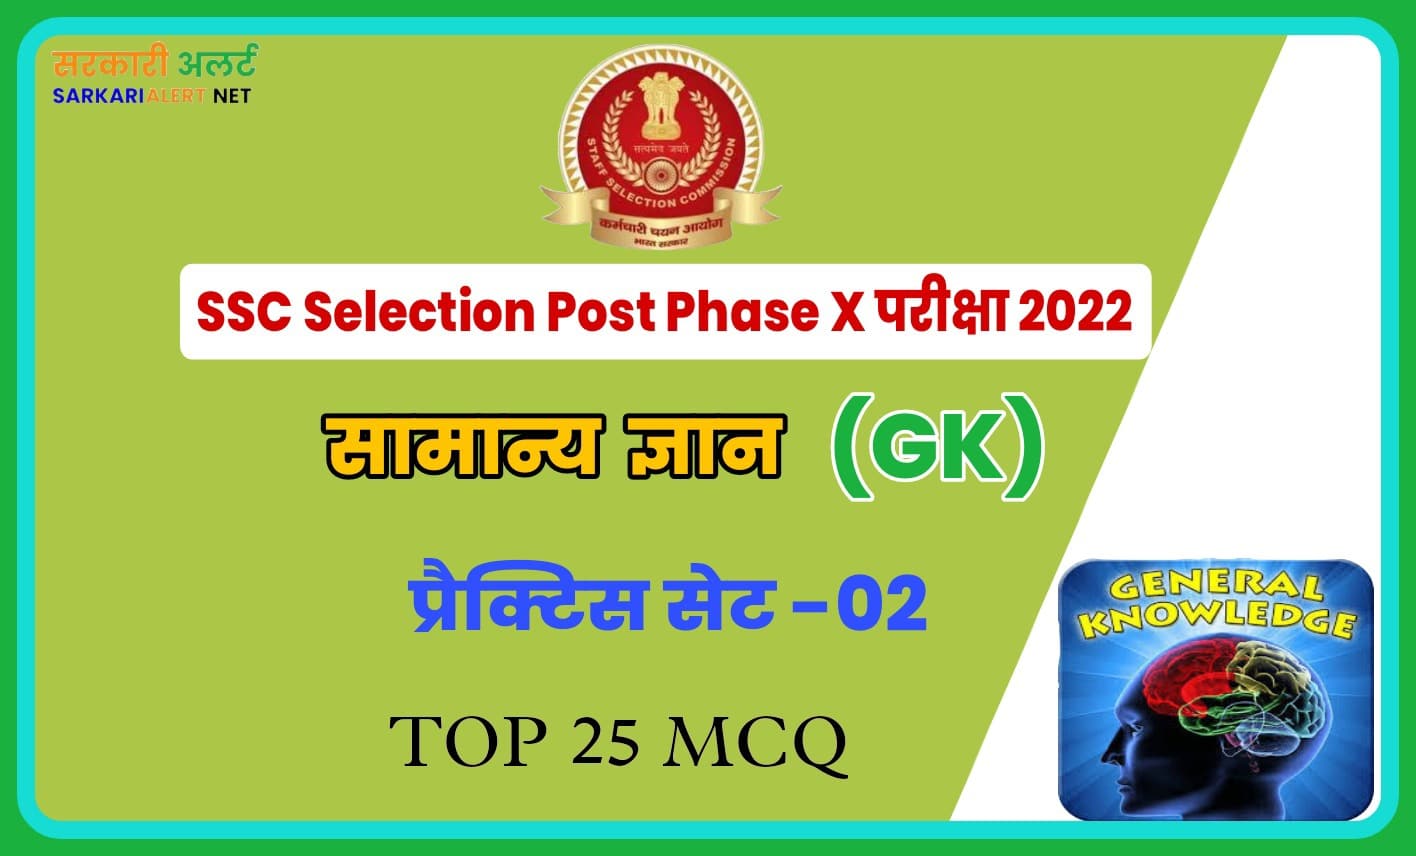 SSC Selection Post Phase X General Knowledge Practice Set 02